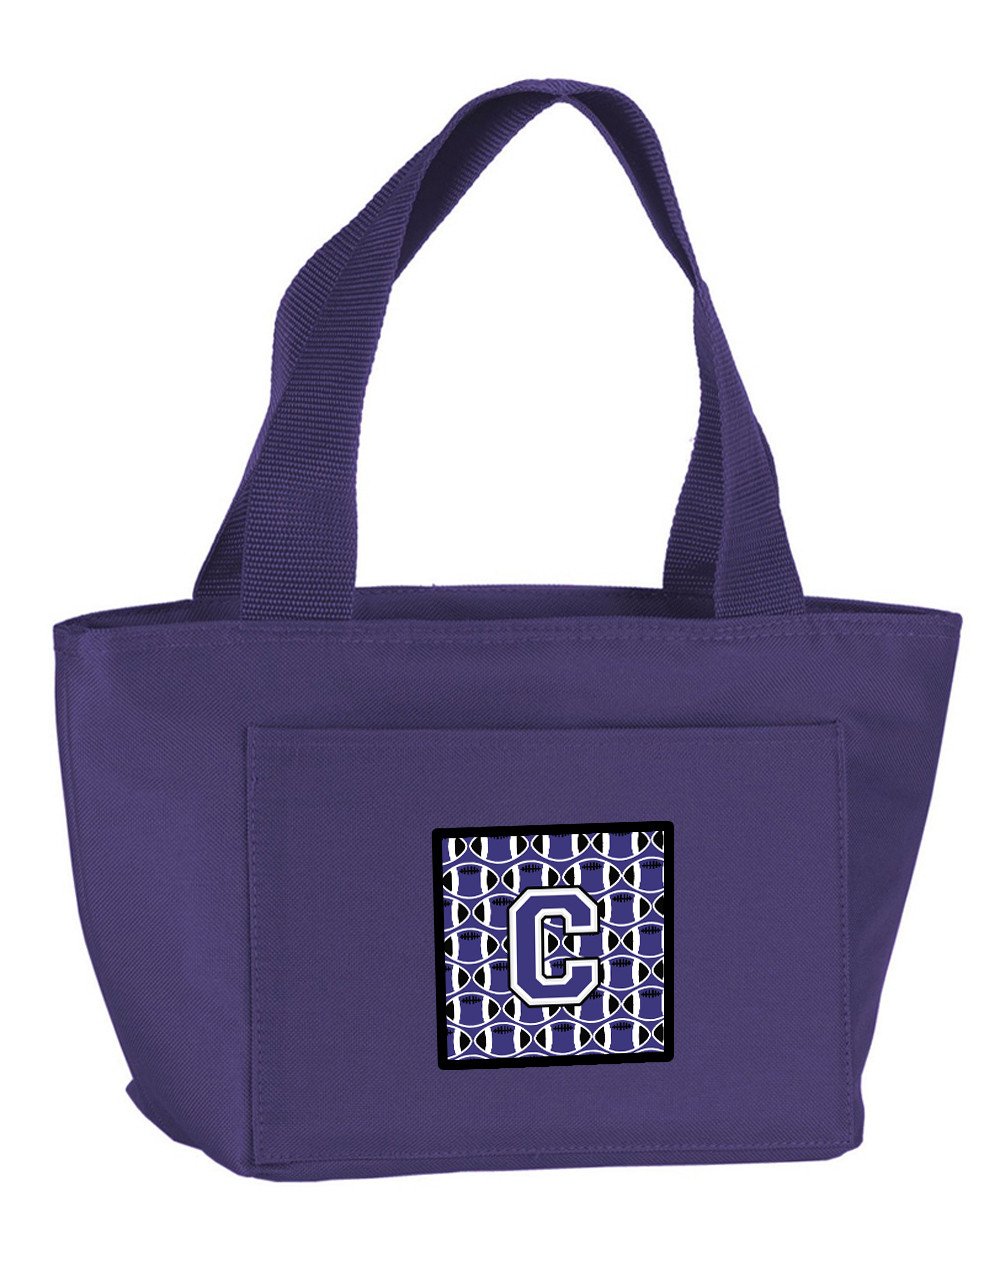 Letter C Football Purple and White Lunch Bag CJ1068-CPR-8808 by Caroline's Treasures